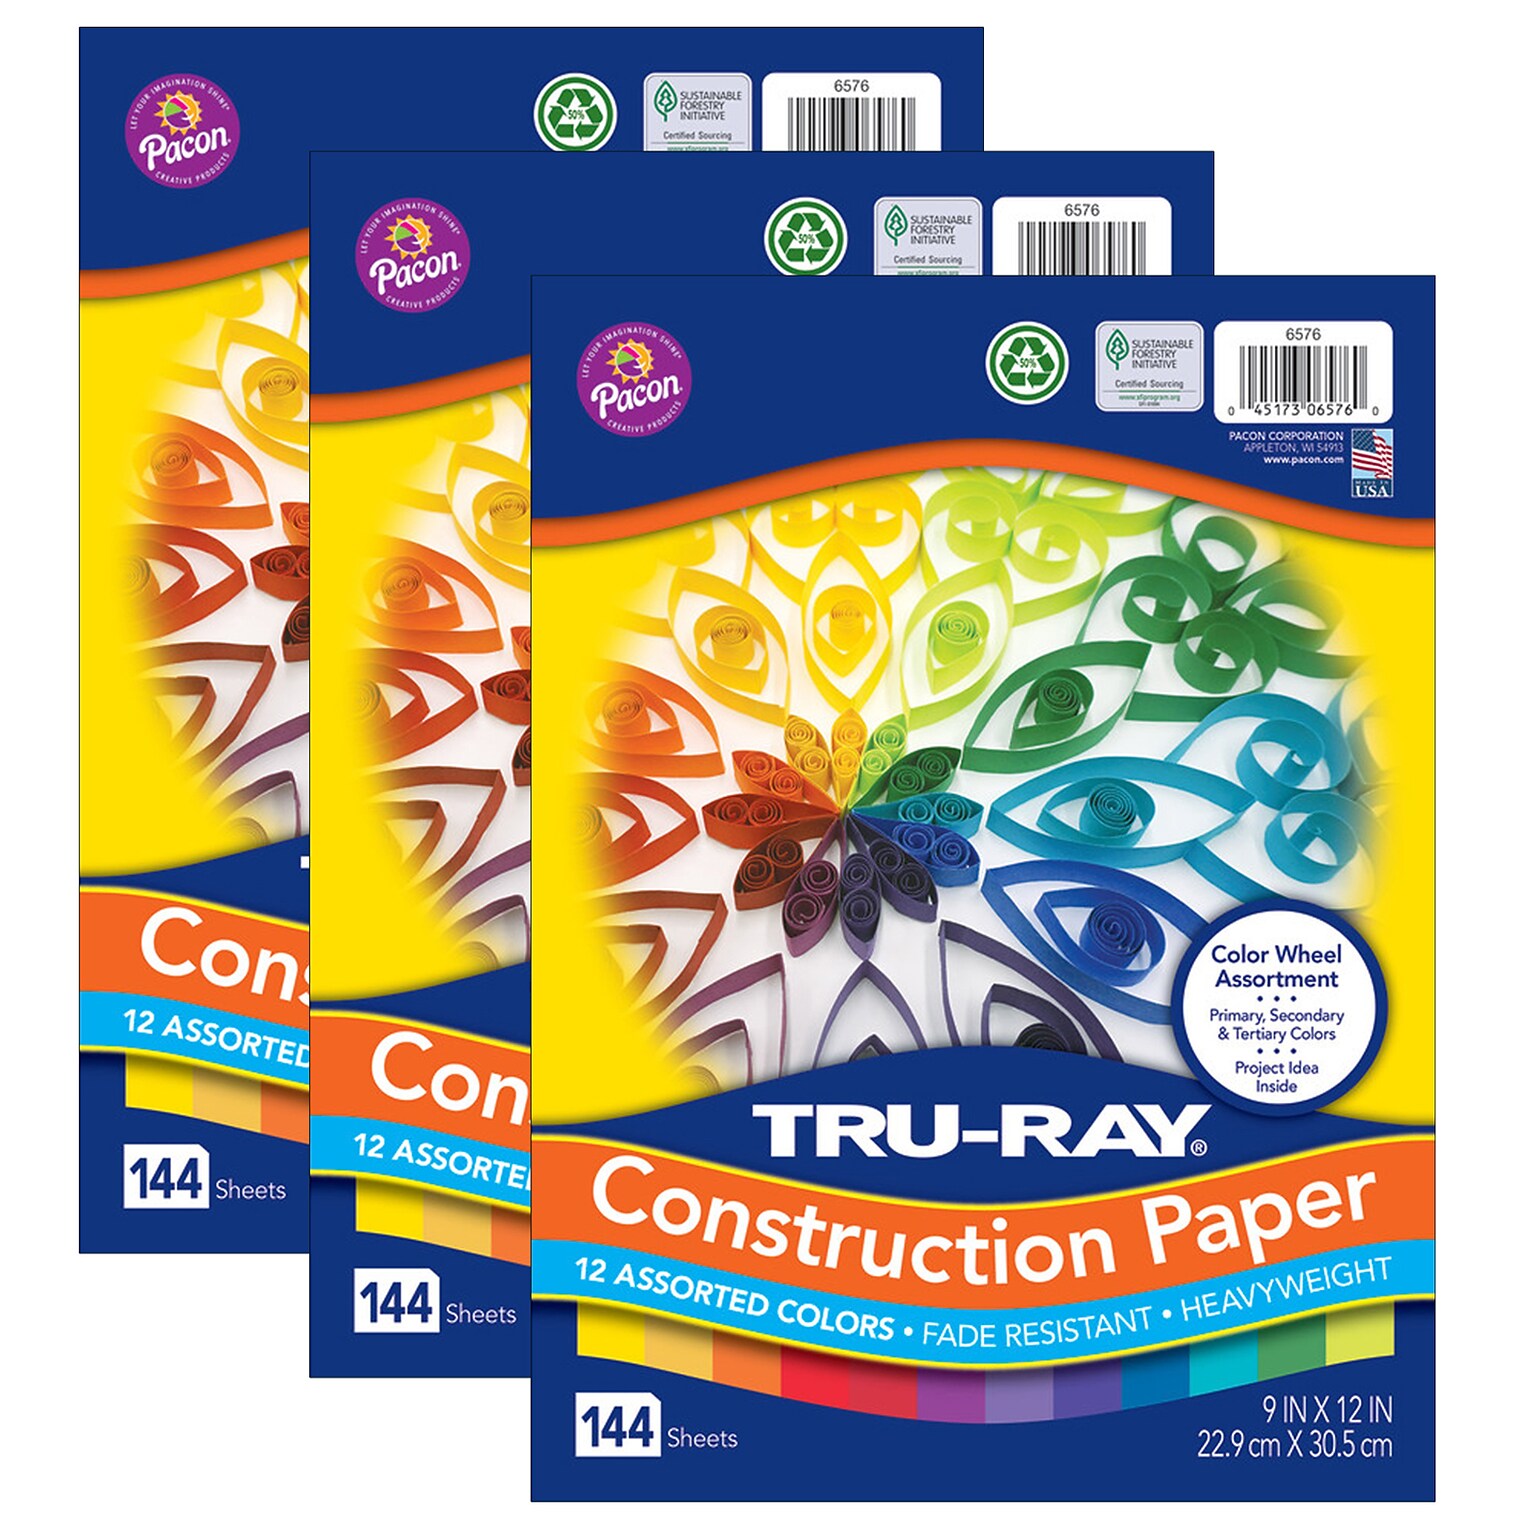 Tru-Ray Color Wheel Assortment 9 x 12 Construction Paper, Assorted, 144 Sheets/Pack, 3 Packs/Bundle (PAC6576-3)